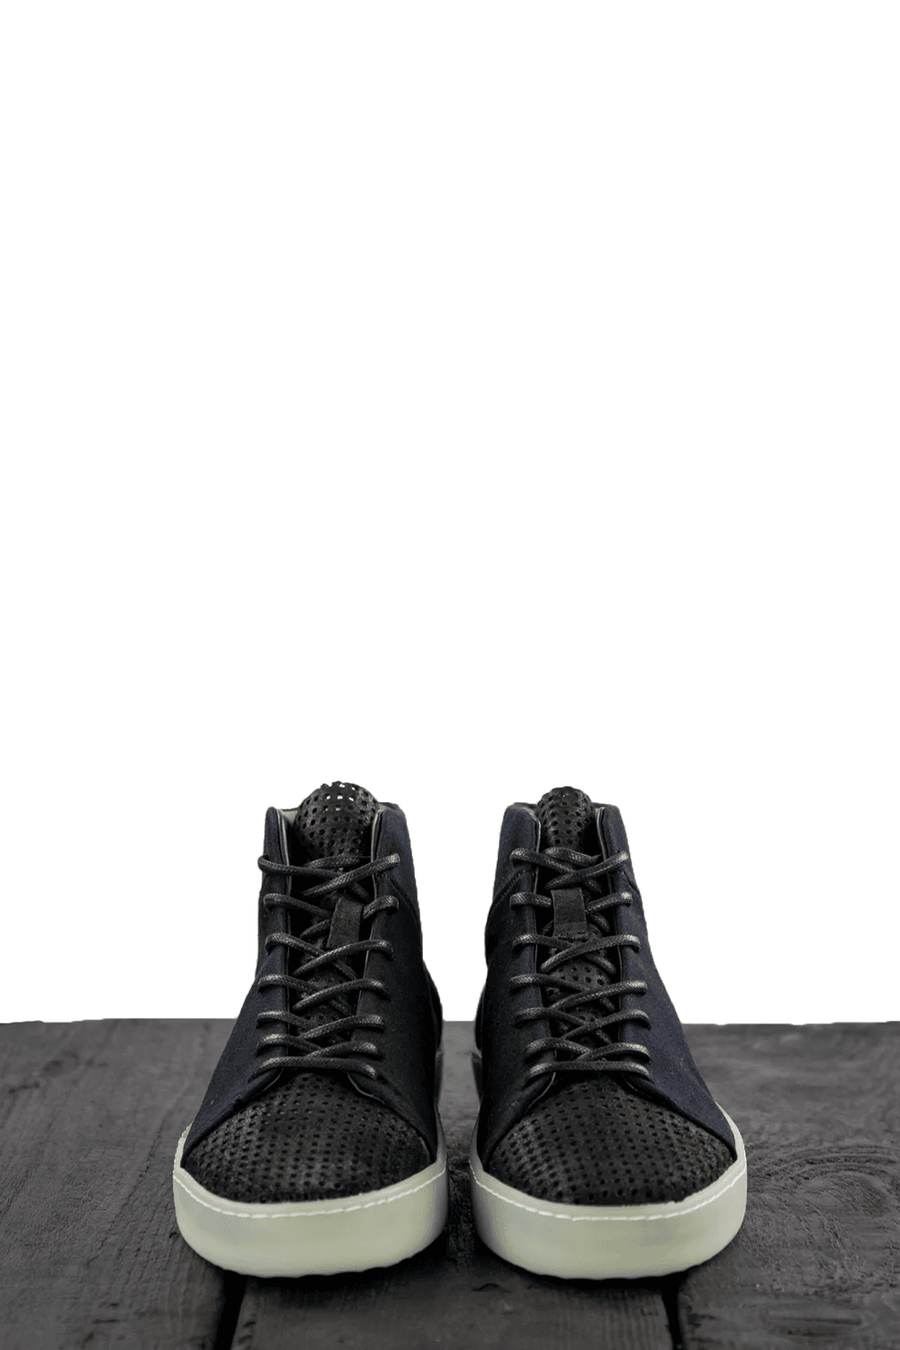 Buy the Hannes Roether Perforated Sneaker Black at Intro. Spend £50 for free UK delivery. Official stockists. We ship worldwide.